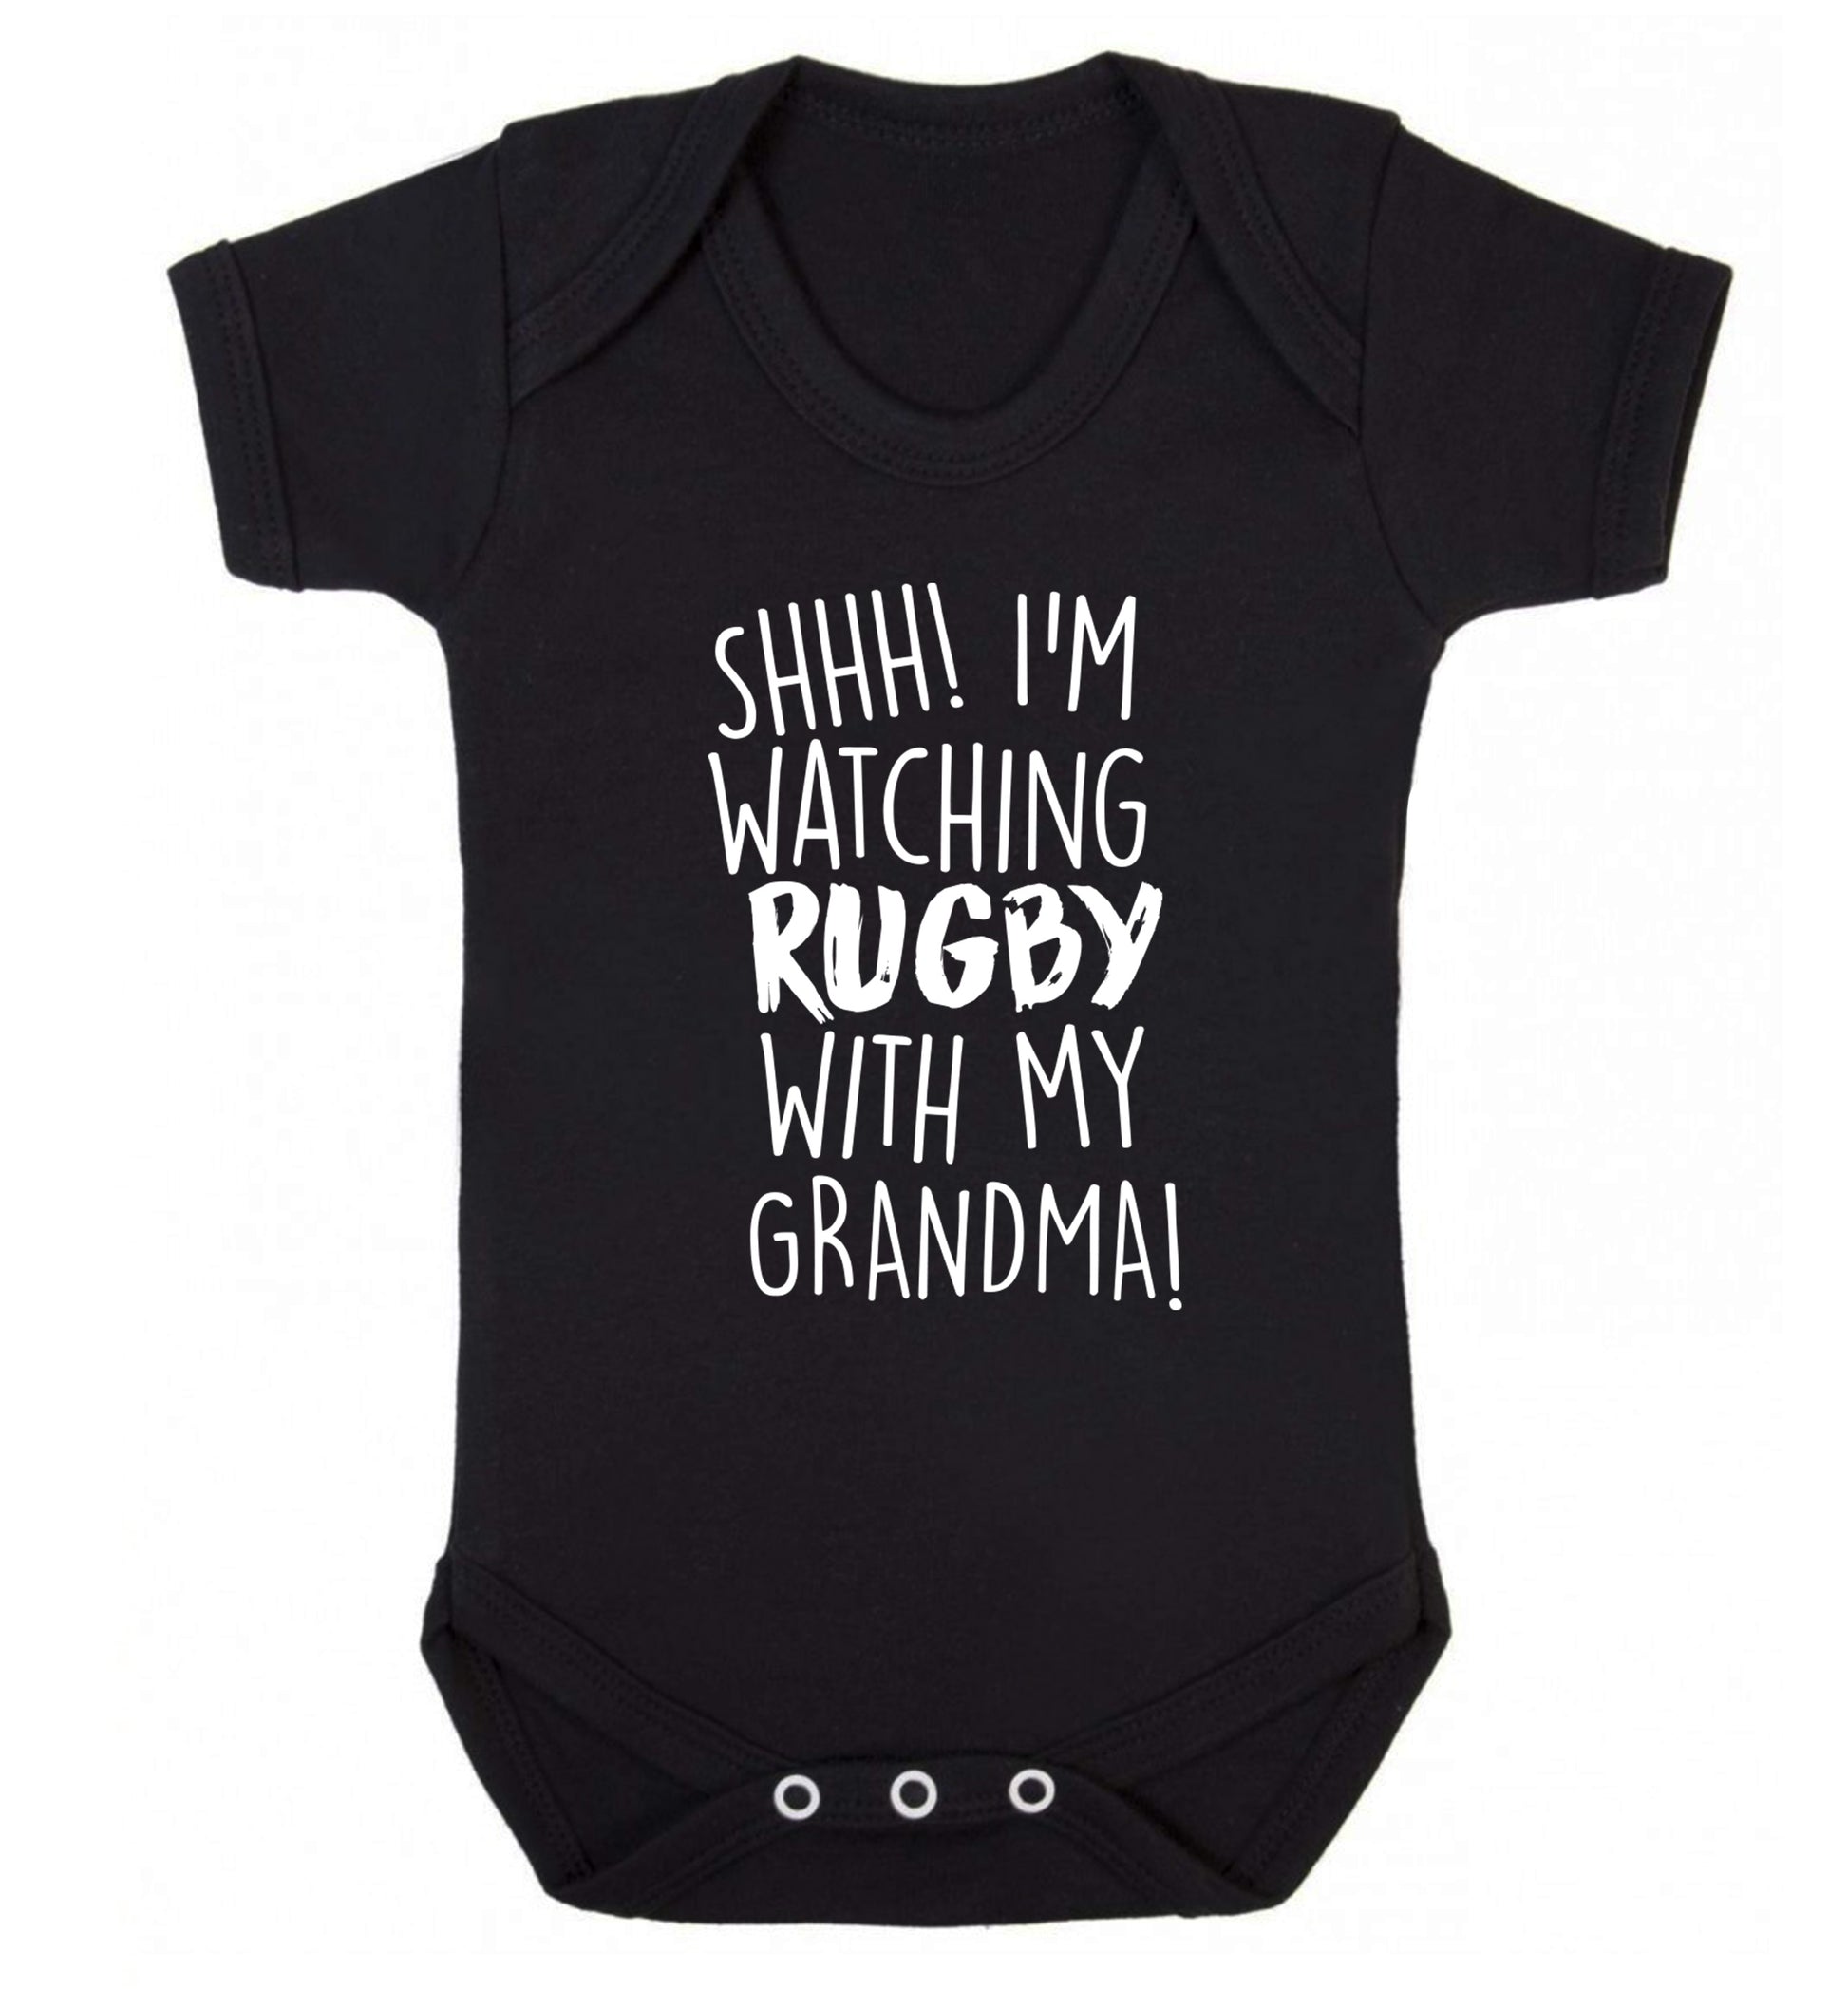 Shh I'm watching rugby with my grandma Baby Vest black 18-24 months